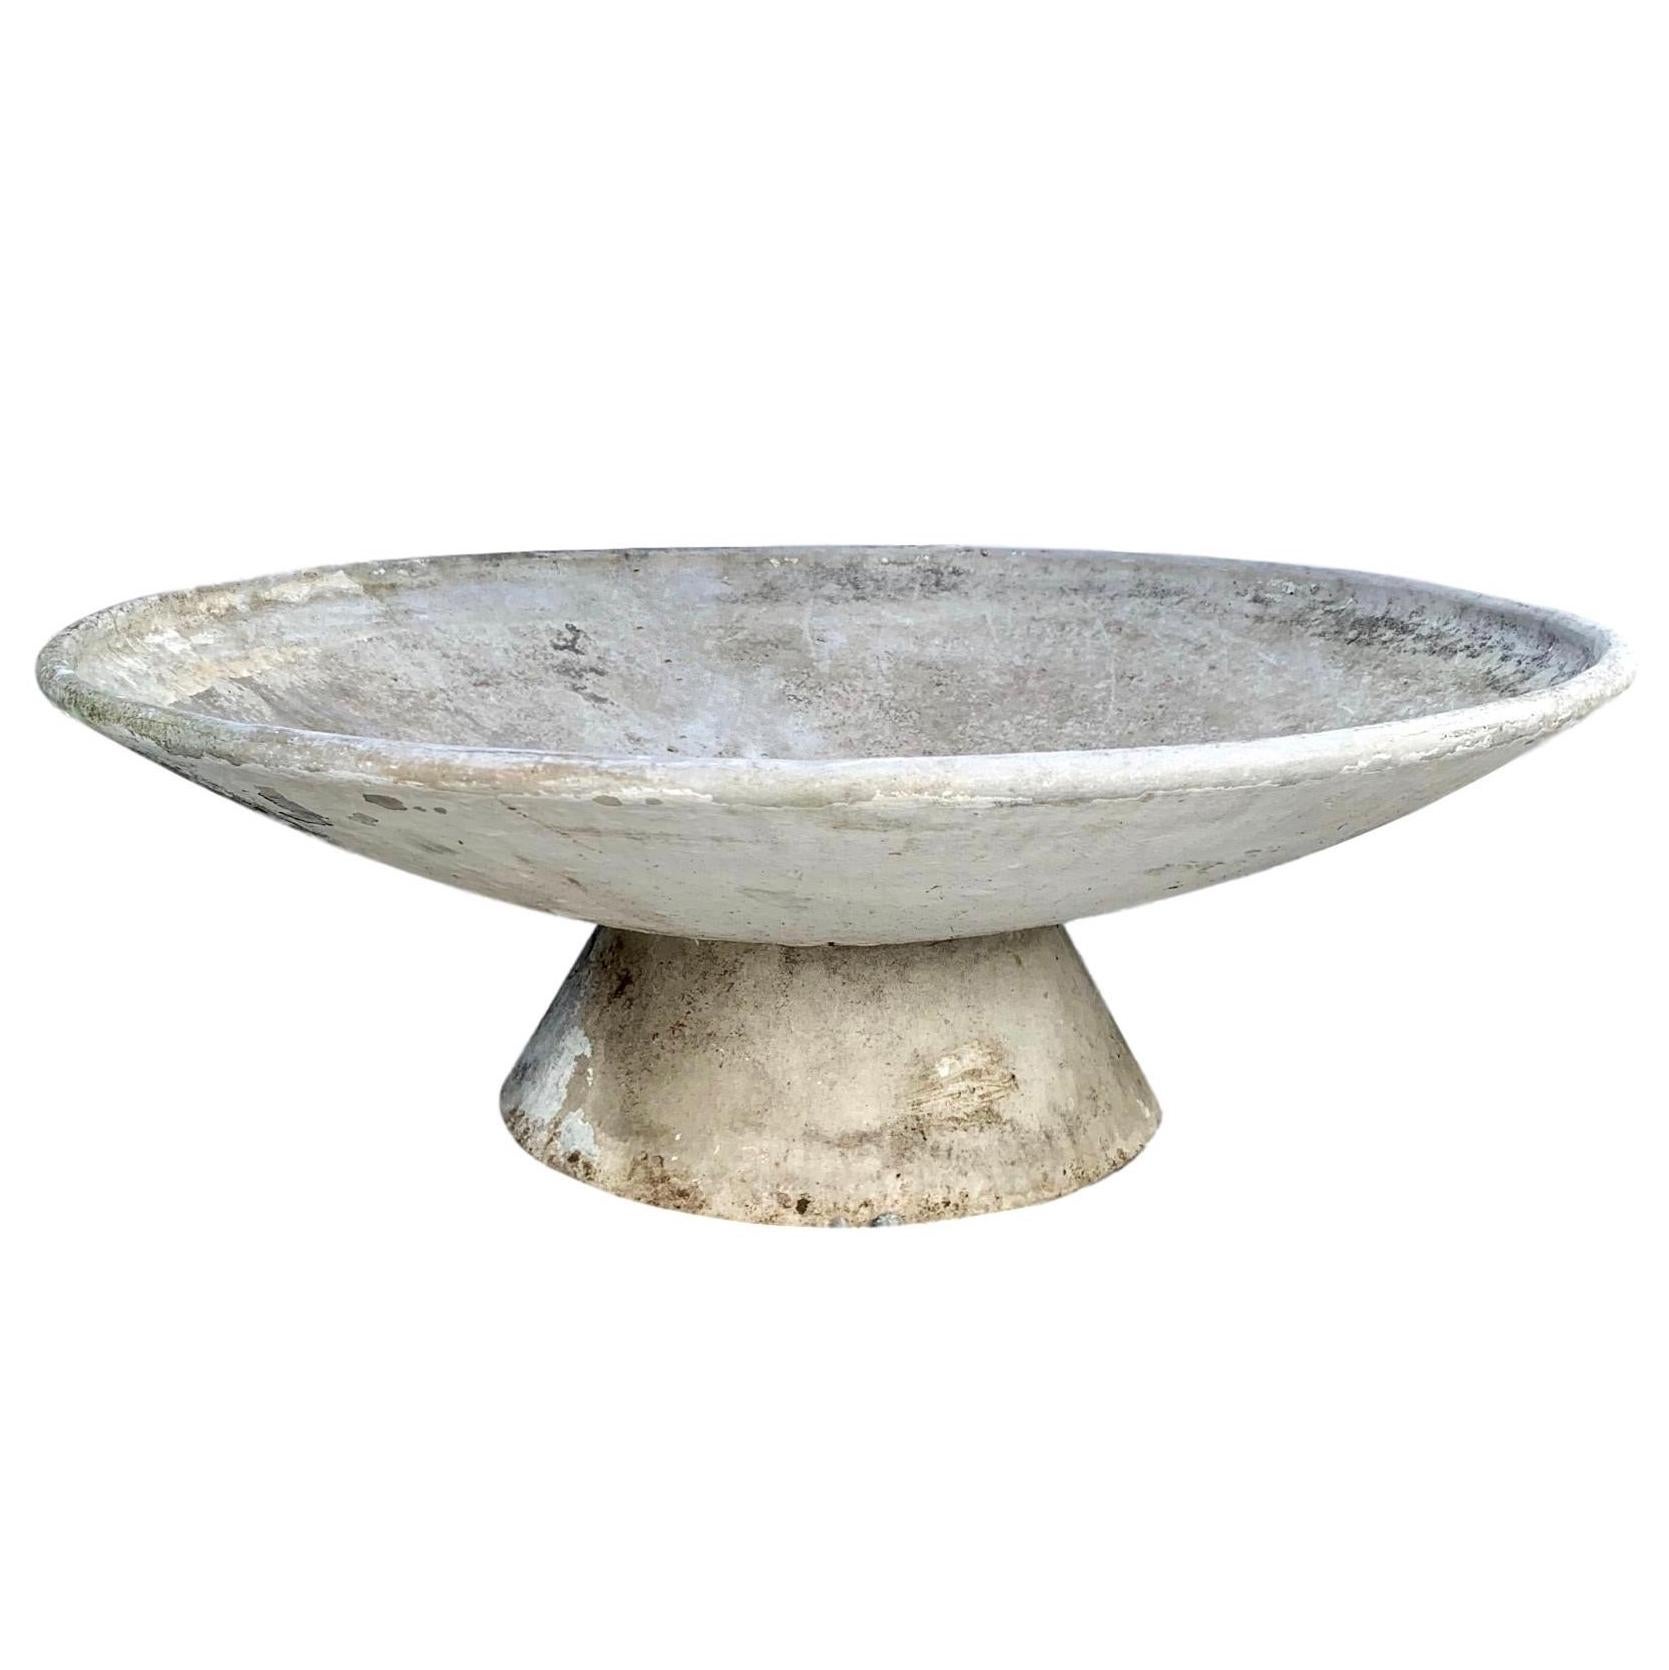 Monumental Willy Guhl 59" Adjustable Two-Piece Concrete Bowl Planters For Sale